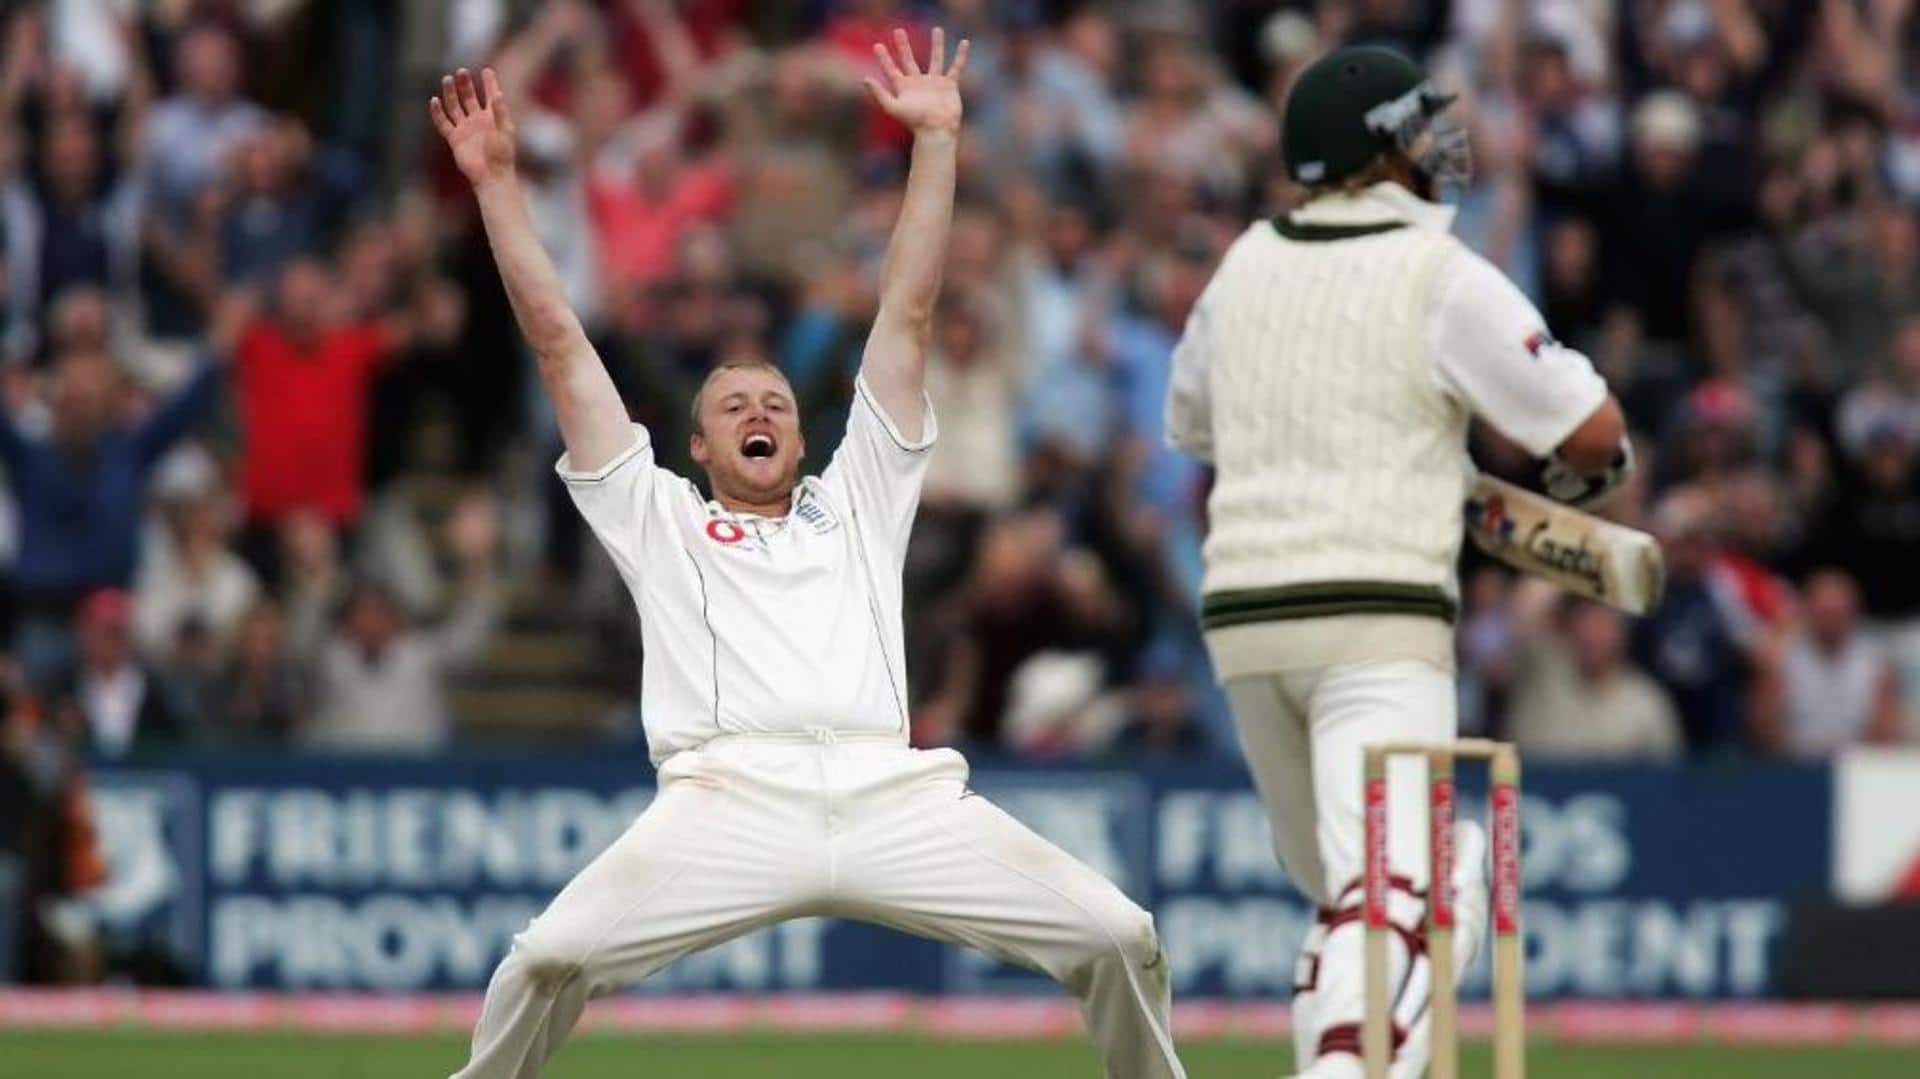 Have a look at the top five Ashes series